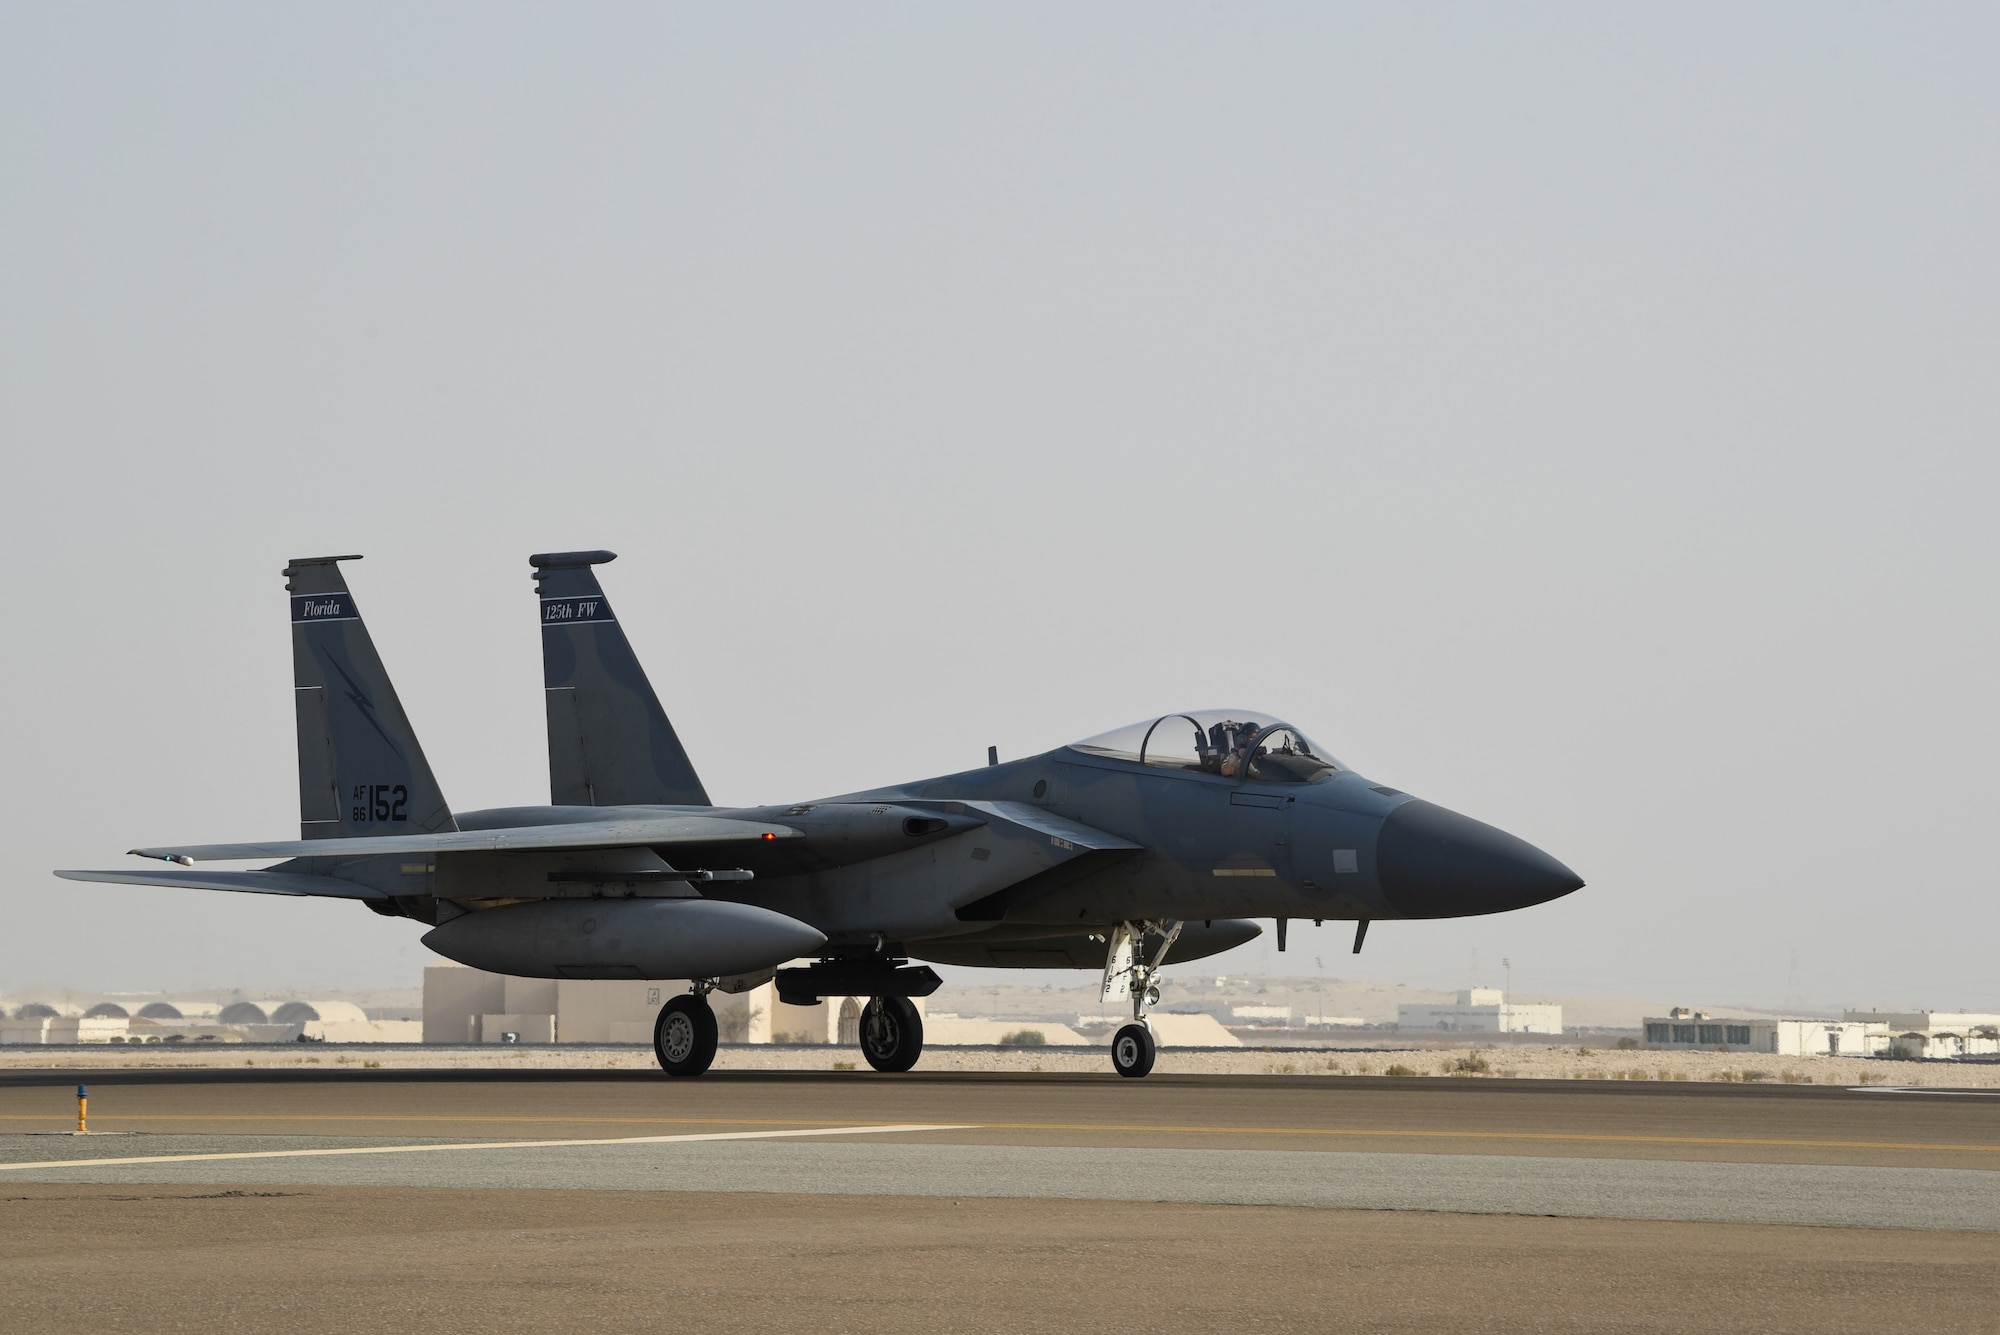 An F-15C Eagle taxis after exercise Hype Eagle Aug. 18, 2019, at Al Dhafra Air Base, United Arab Emirates. The 159th Expeditionary Fighter Squadron forward deployed to Prince Sultan Air Base, Saudi Arabia to challenge their flexibility at expanding tactical and strategical reach while strengthening coalition and regional partnerships in the U.S. Central Command area of responsibility. (U.S. Air Force photo by Tech. Sgt. Jocelyn Ford)